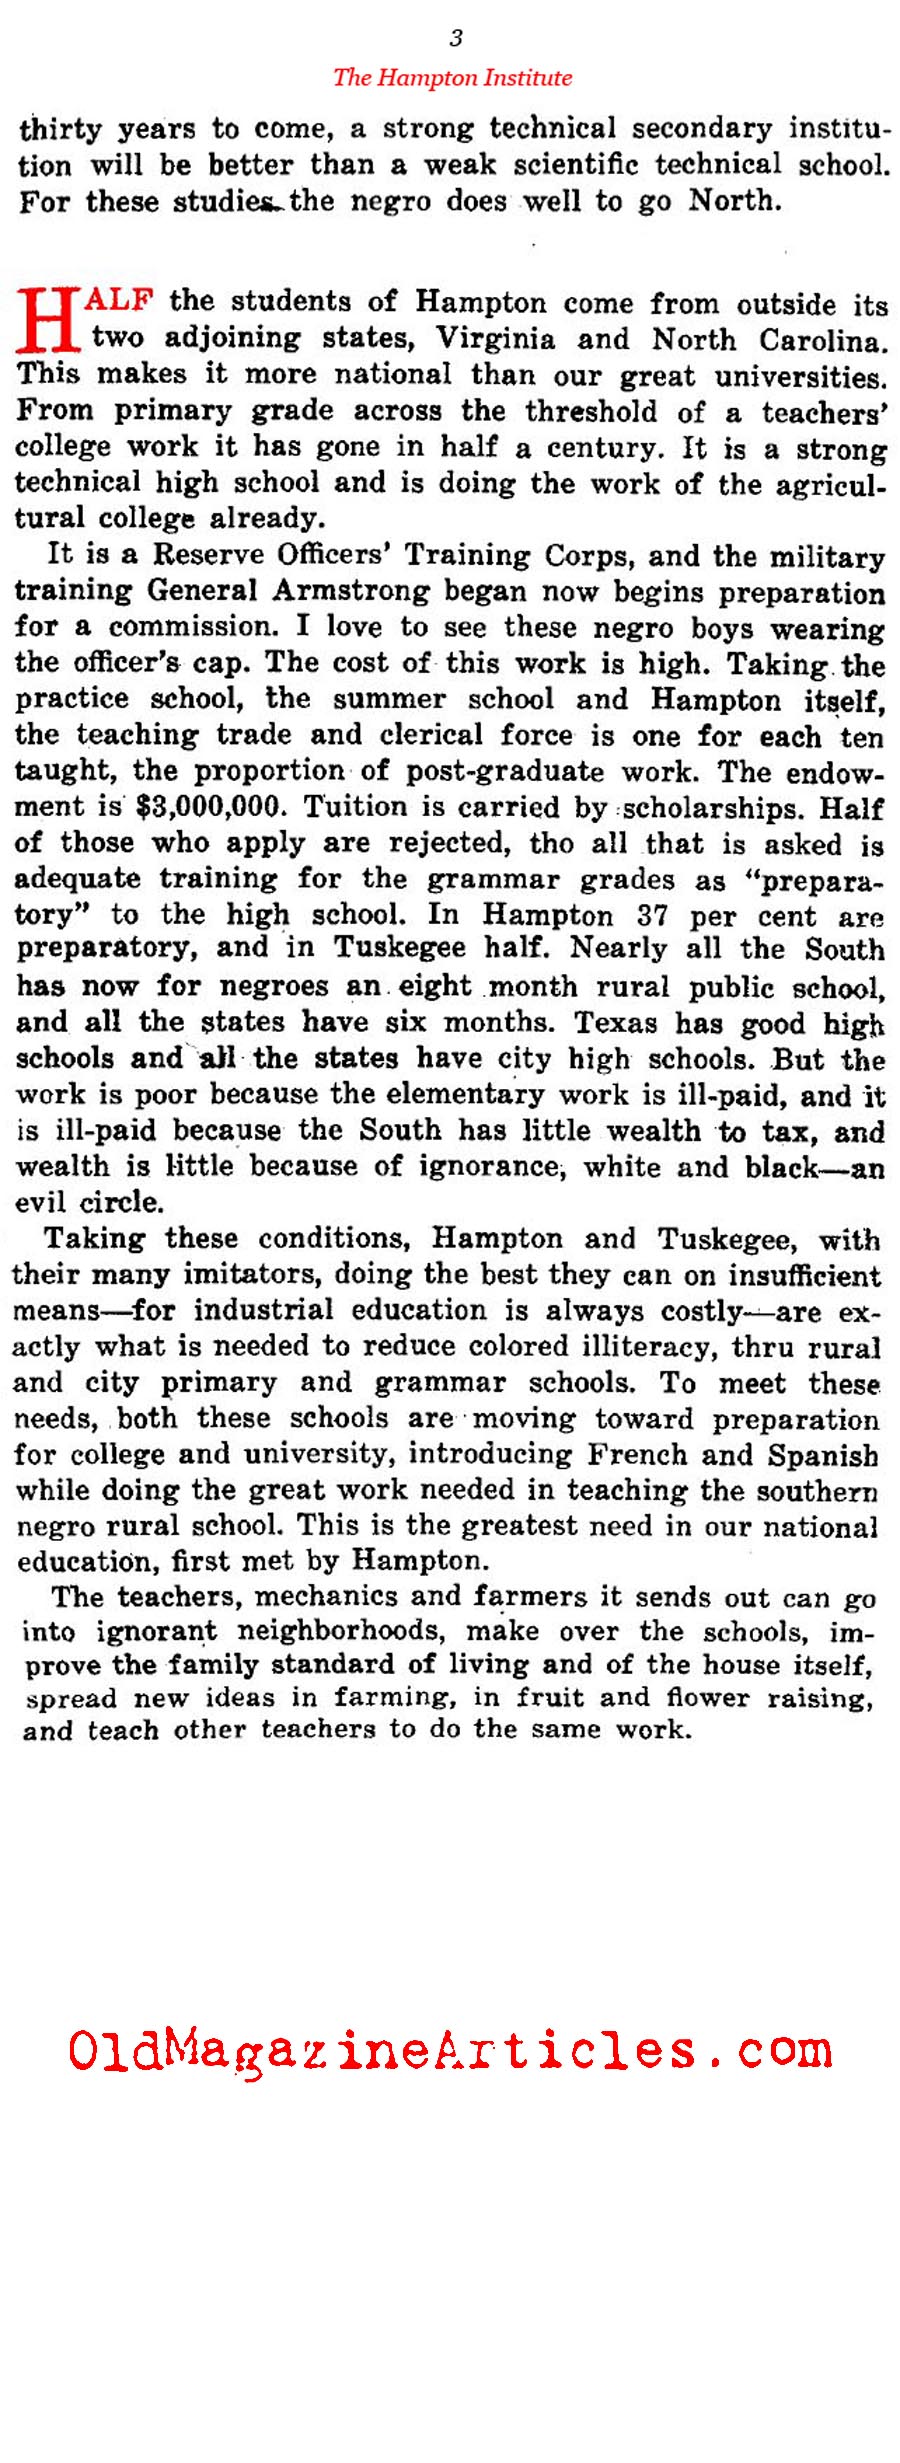 Educating the Negro (The Independent, 1921)